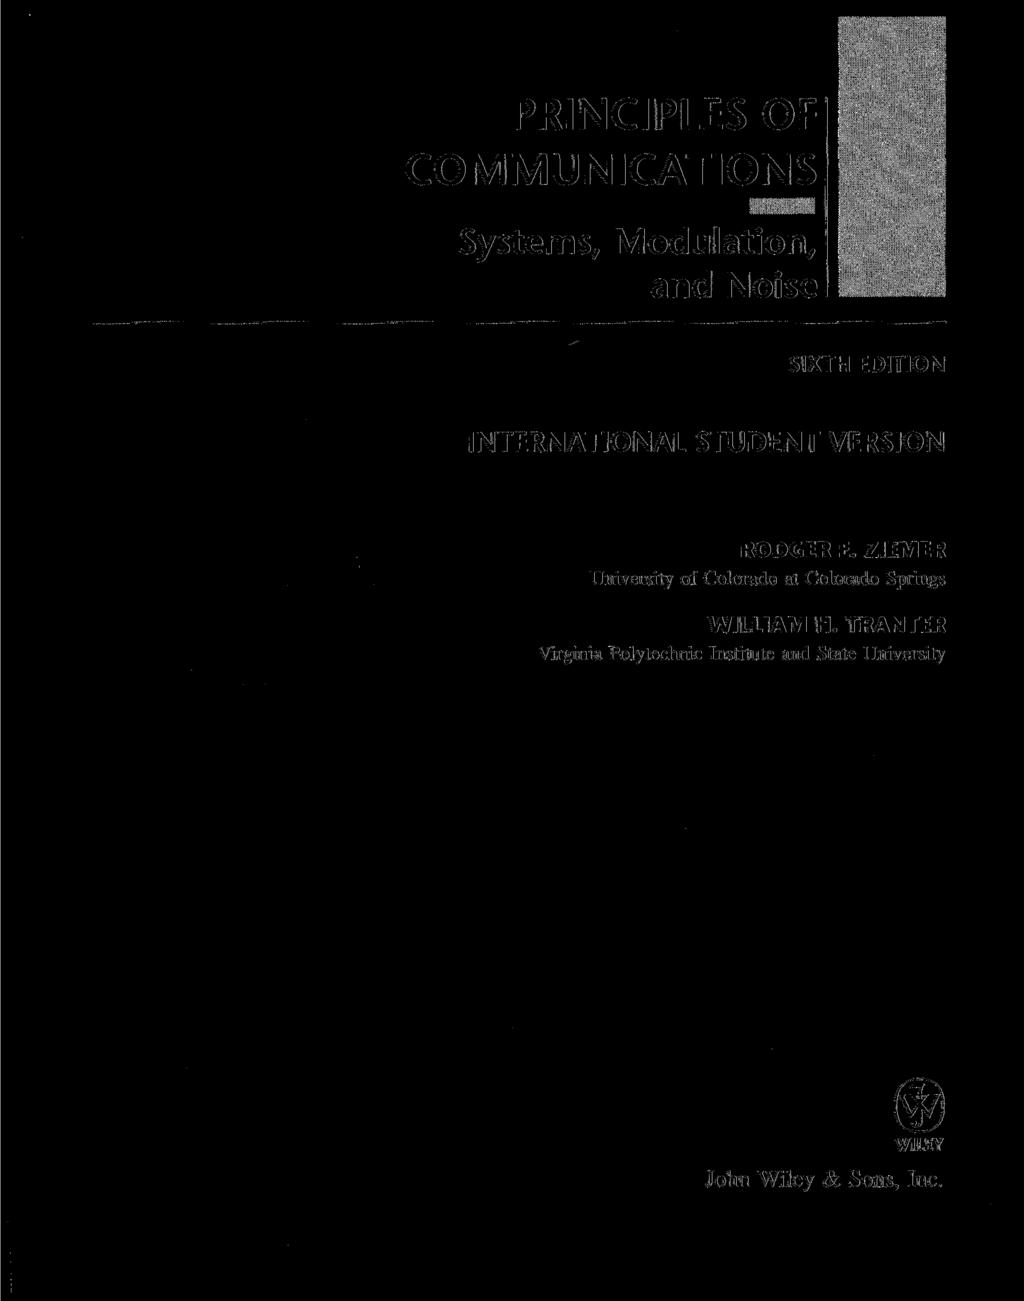 PRINCIPLES OF COMMUNICATIONS Systems, Modulation, and Noise SIXTH EDITION INTERNATIONAL STUDENT VERSION RODGER E.